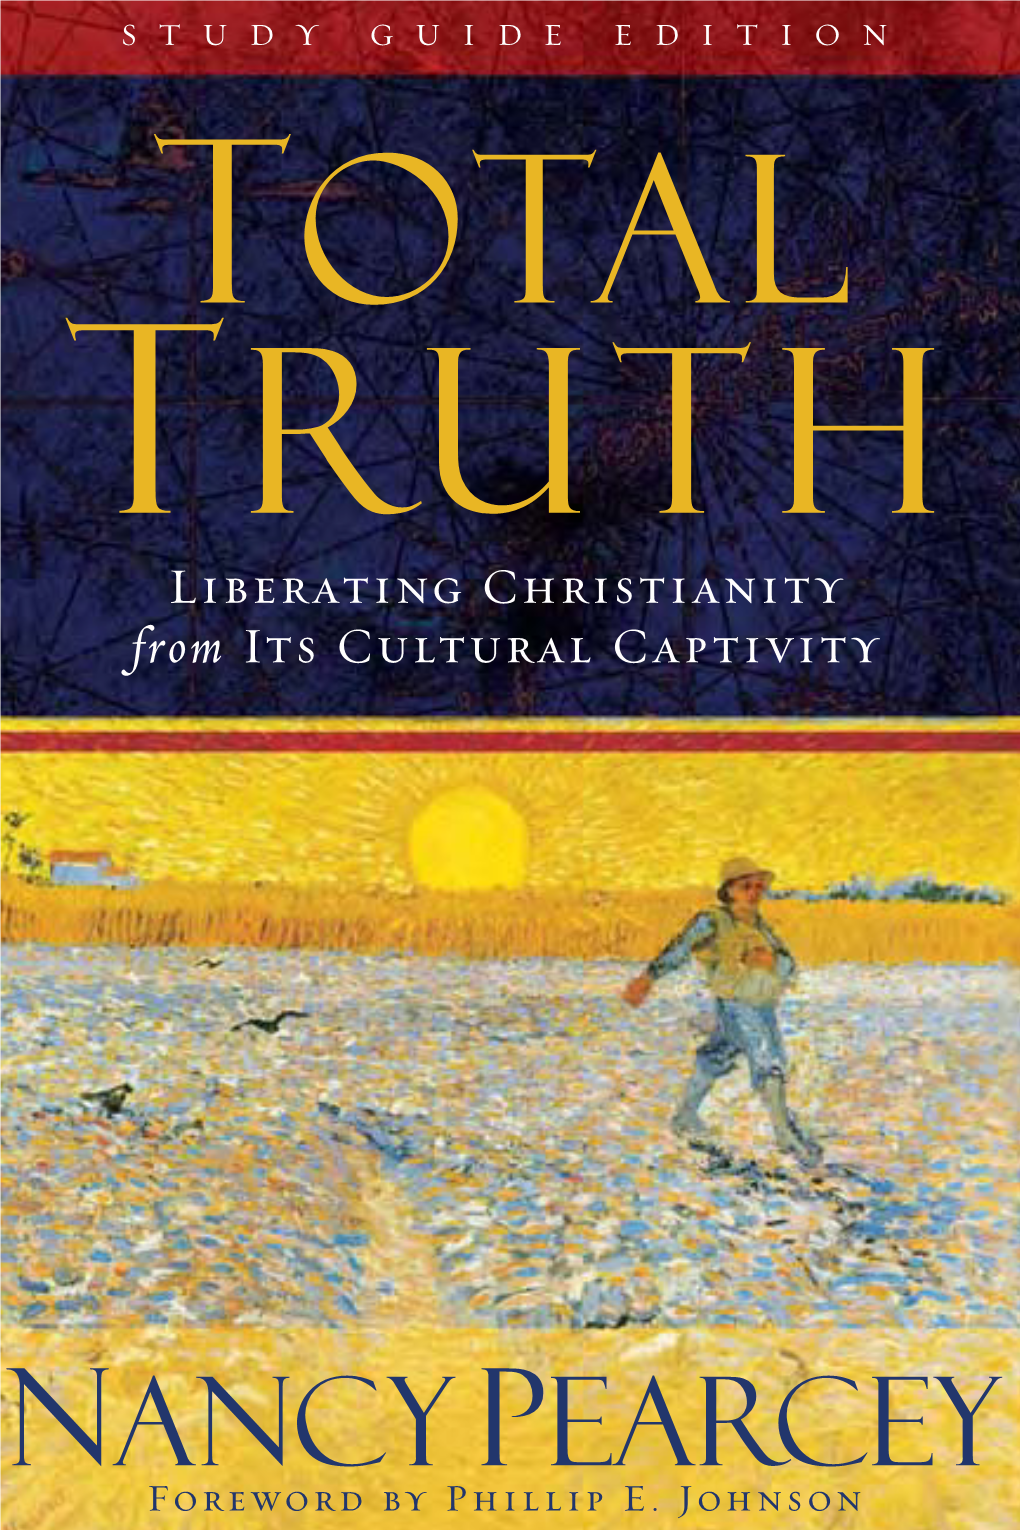 Total Truth: Liberating Christianity from Its Cultural Captivity (Study Guide Edition) Copyright © 2004, 2005 by Nancy R